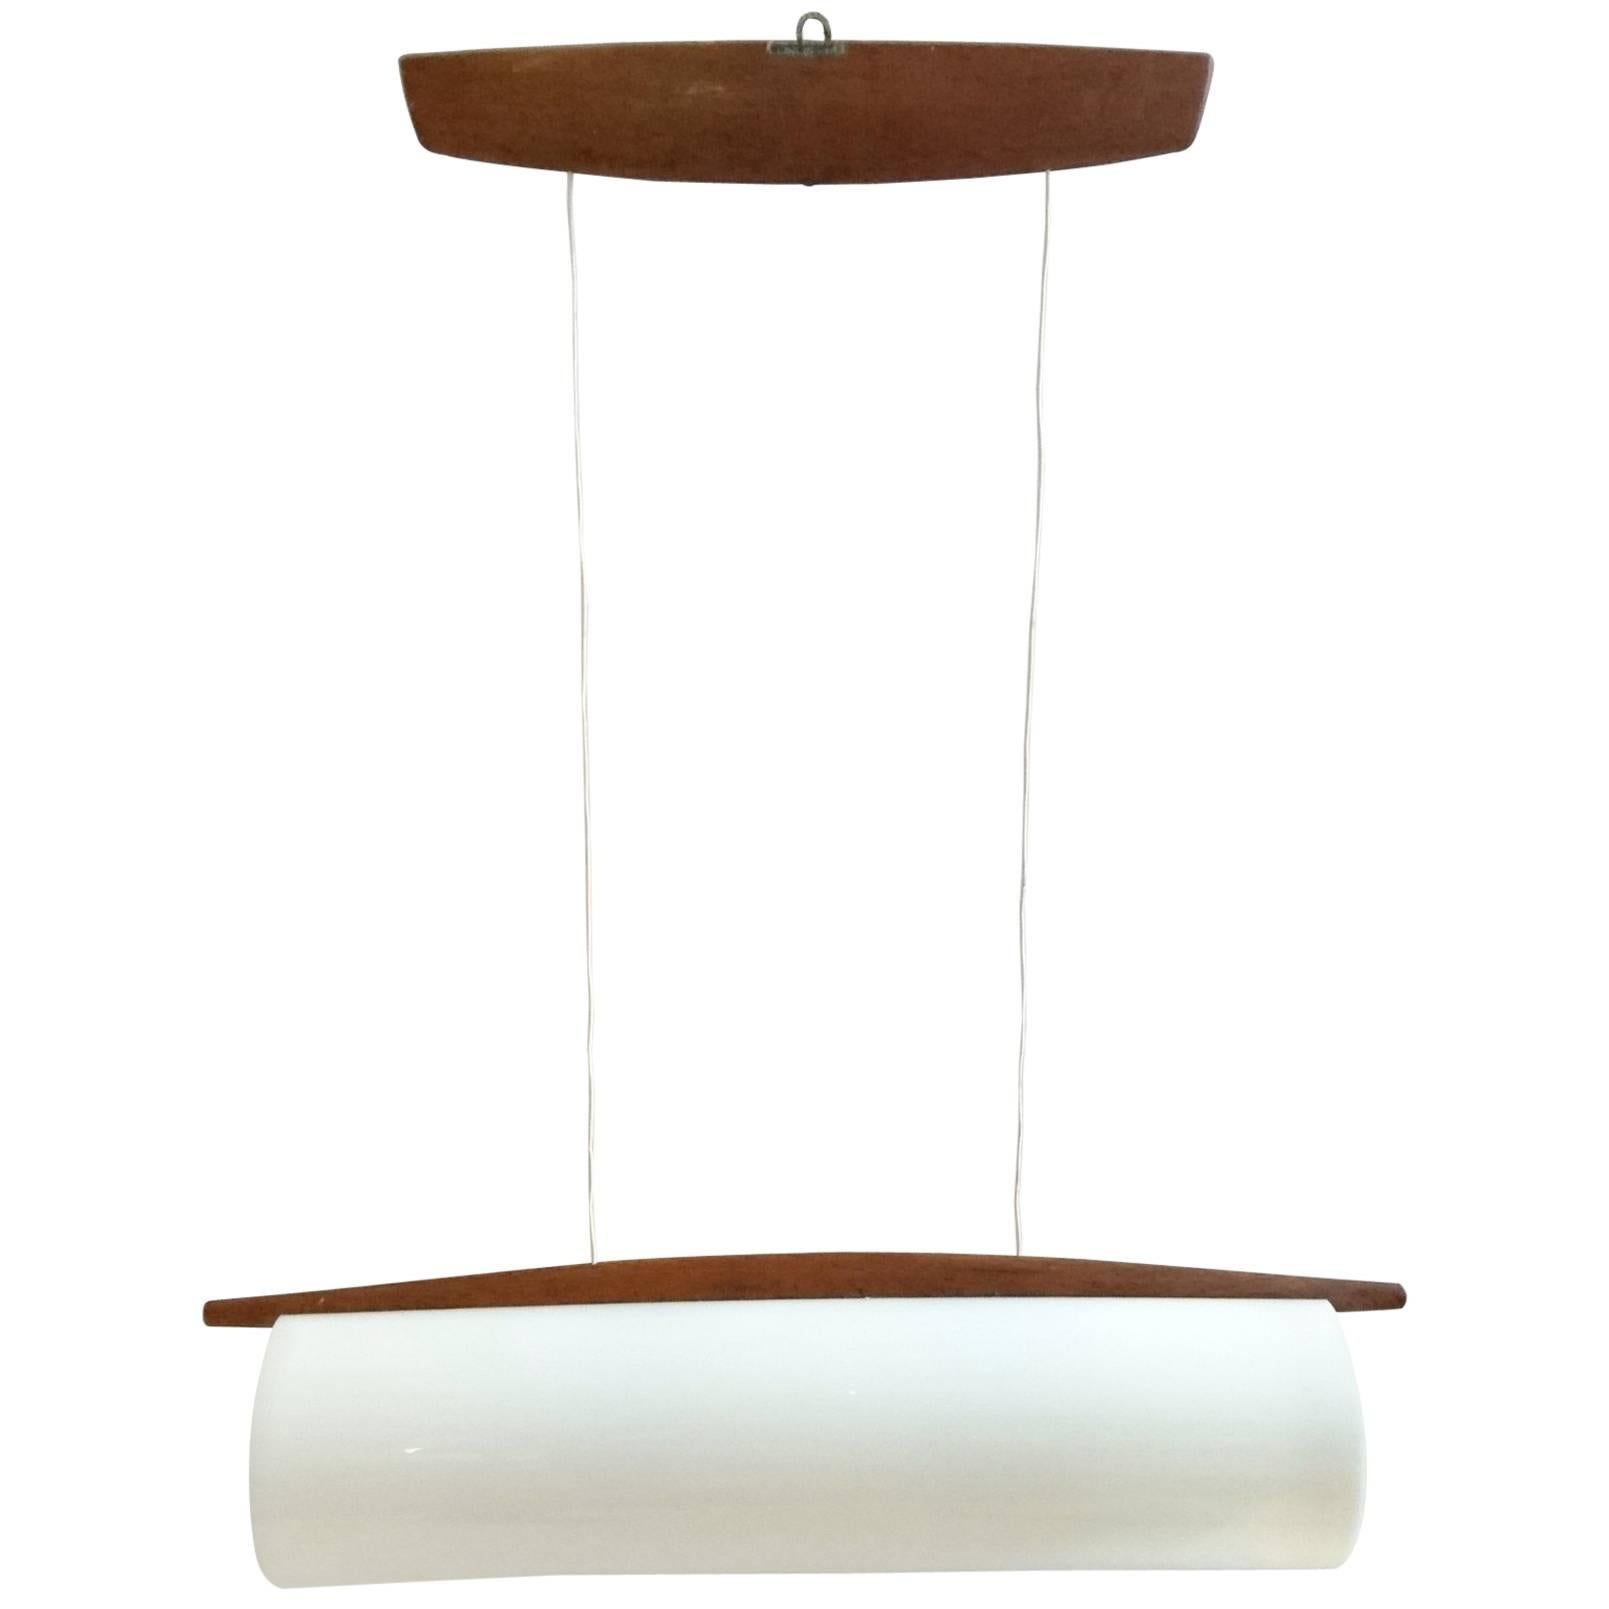 Cylindrical ceiling lamp adjustable in height and made from white plexiglass and oak. This lamp has model number 554, which is rare and was designed by Uno and Osten Kristiansson. Produced by Luxus in Vittsjö, Sweden. The original sticker from the